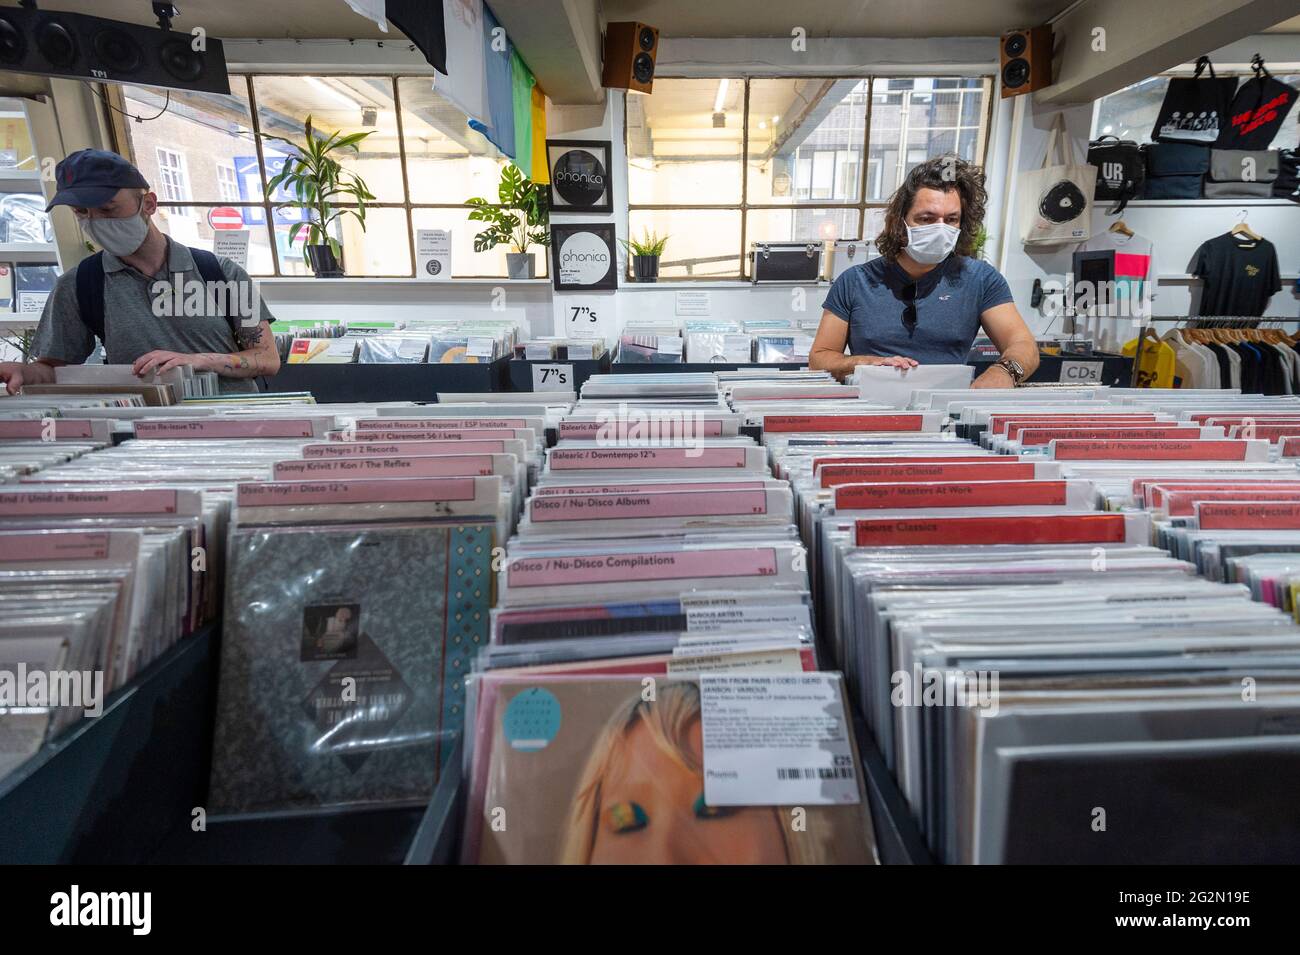 London Uk 12 June 21 Customers In Phonica Records In Soho On Record Store Day Where Independent Record Shops Worldwide Celebrate Music Including Special Vinyl Releases Made Exclusively For The Day In